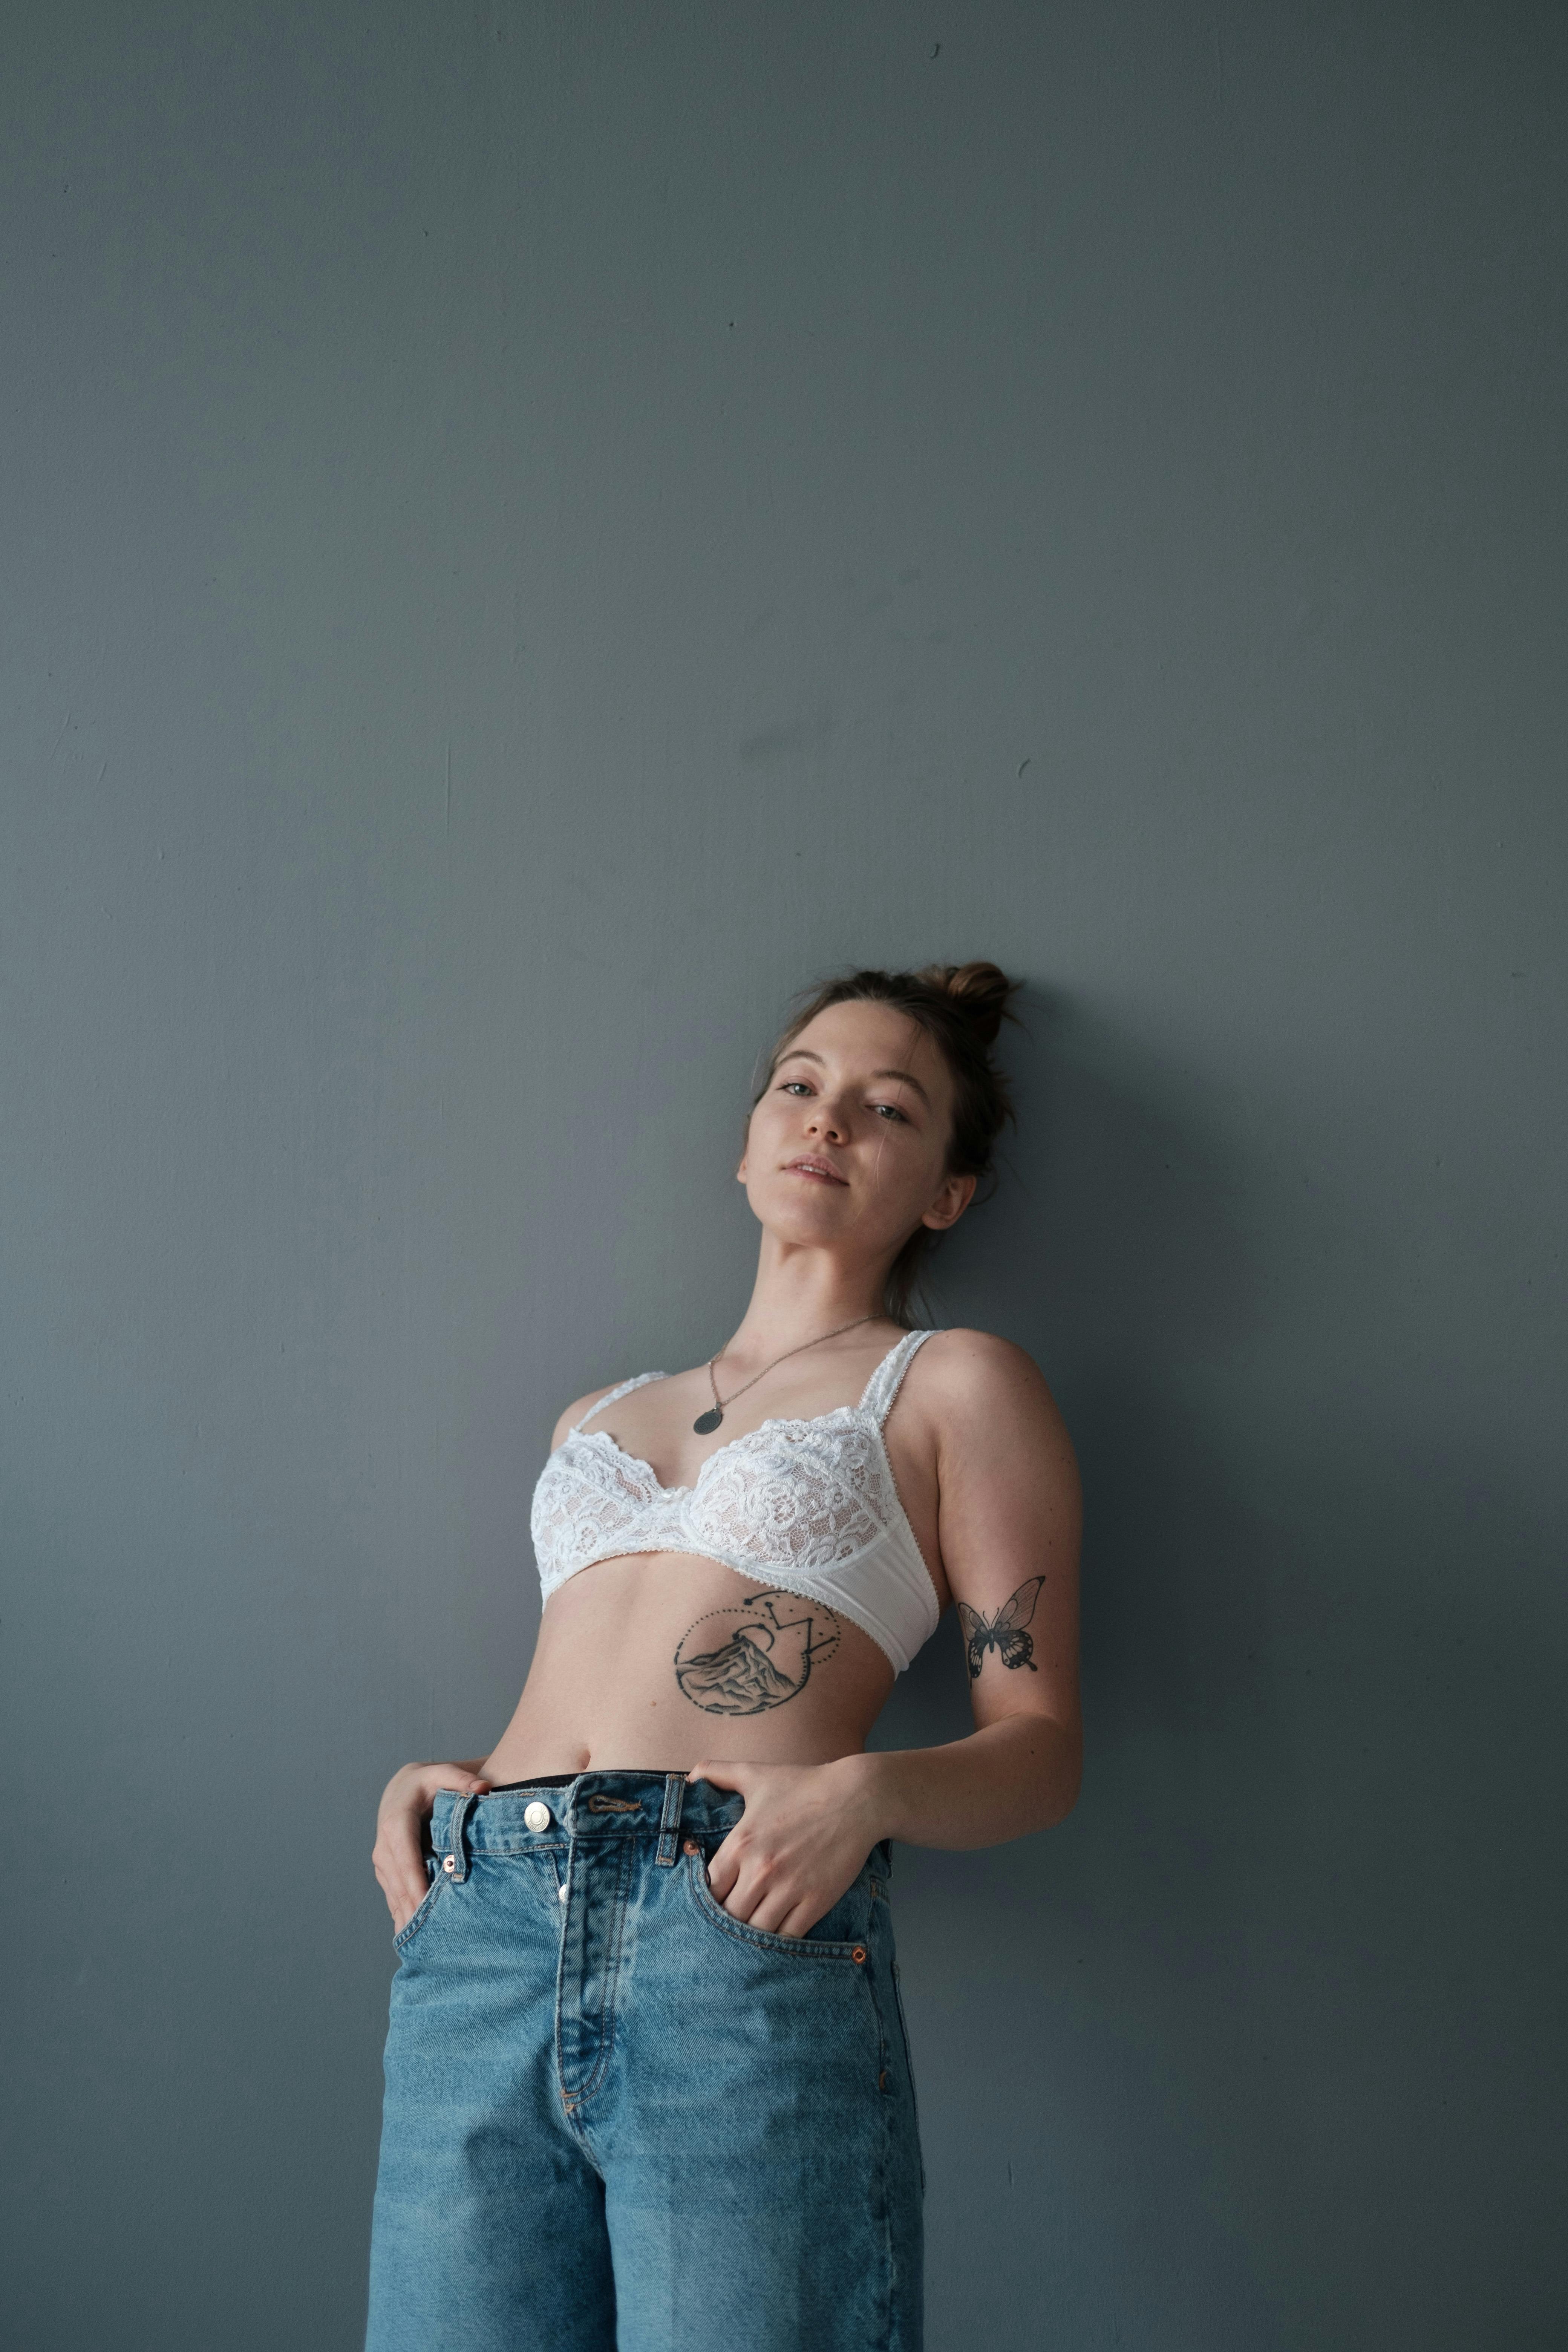 Woman in a White Brassiere Posing with Her Hands in Her Pockets · Free Stock  Photo